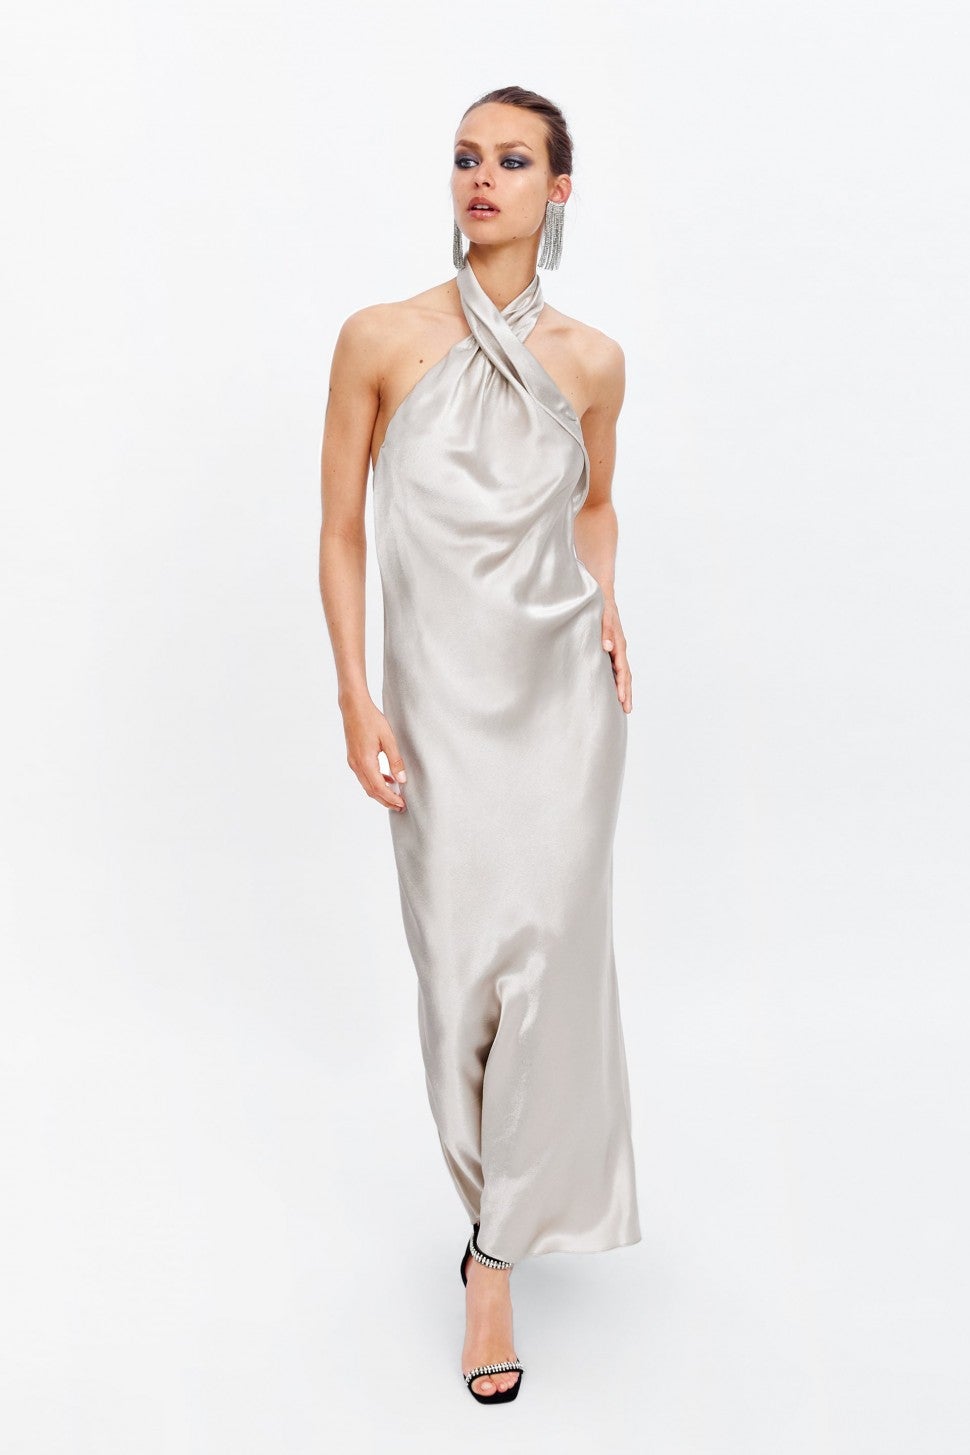 The Best Wedding Guest Dresses by Wedding Type -- Shop Our Picks ...